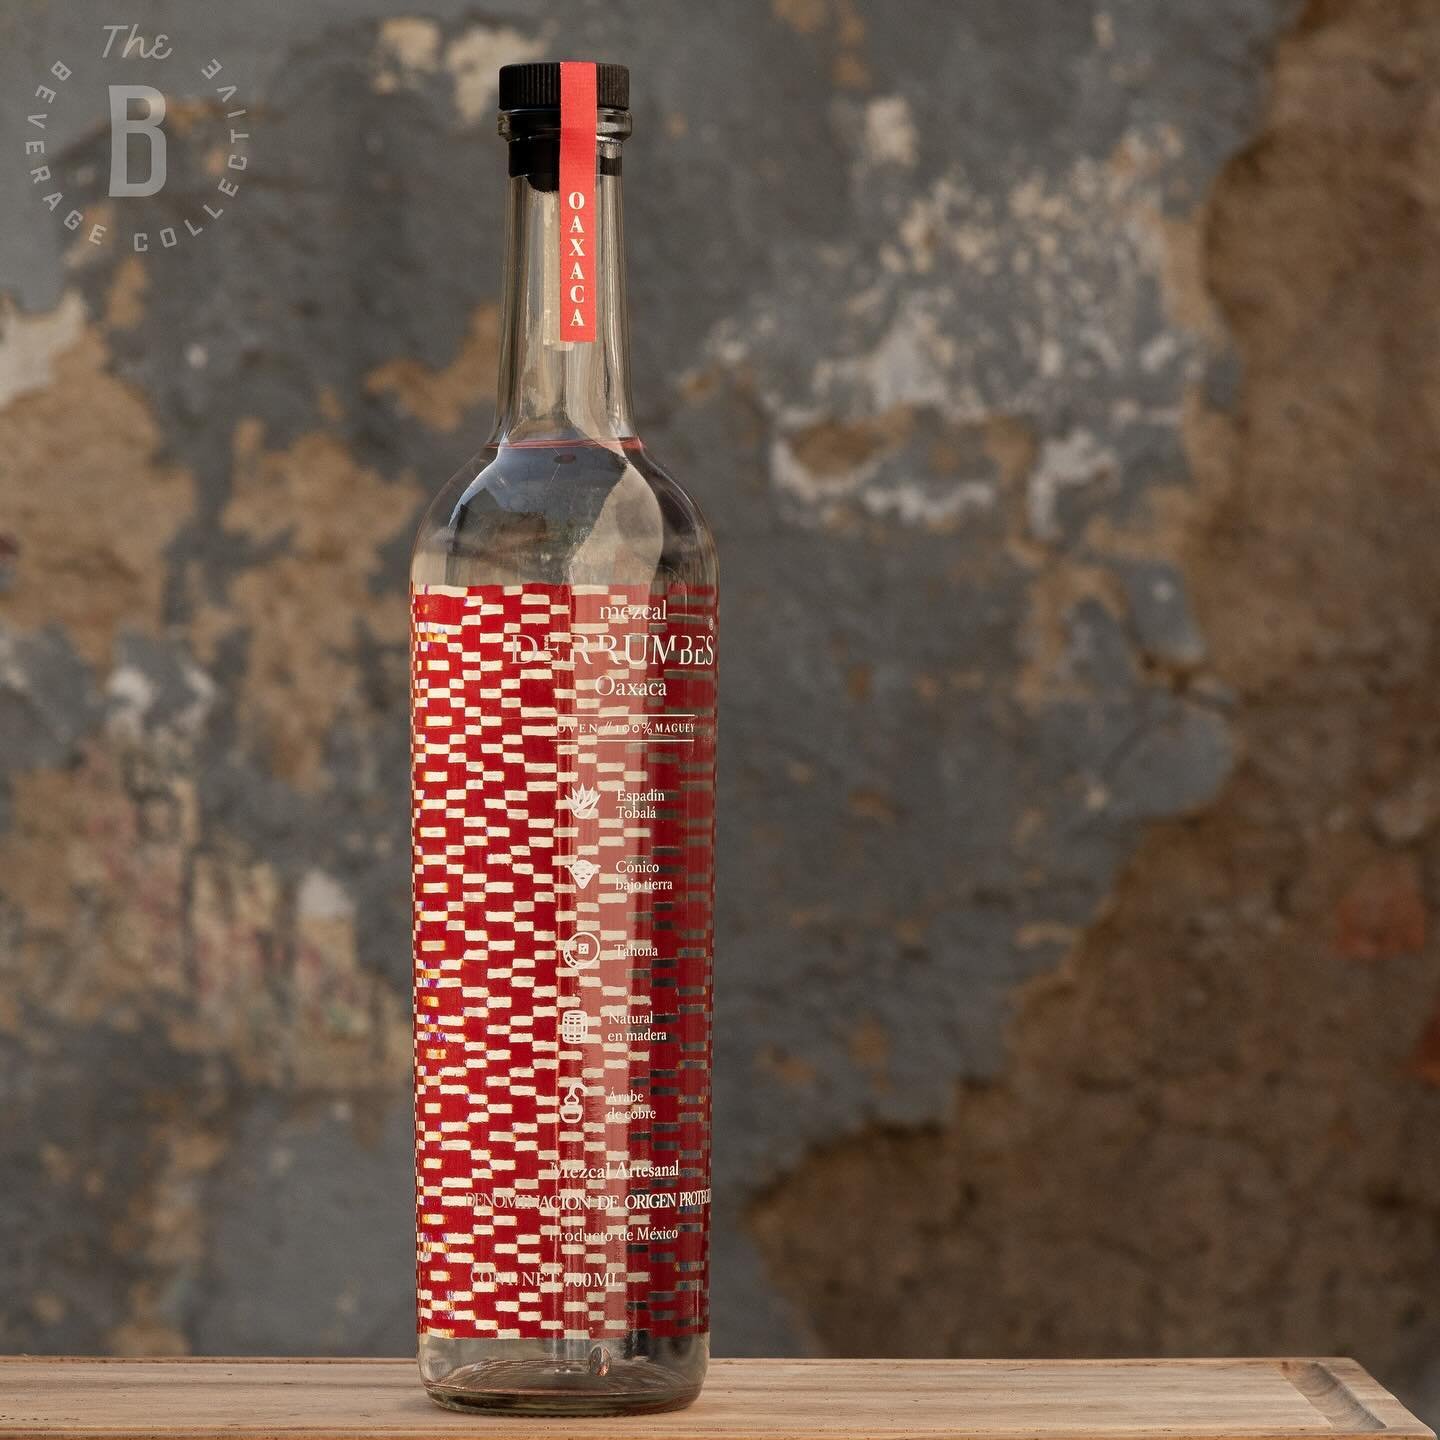 Derrumbes Mezcal Oaxaca is the first expression of Derrumbes, capturing the vibrant character of the Central Valleys of Oaxaca, the heart of agave diversity. This blend of Espad&iacute;n and Tobal&aacute; showcases the expertise of Maestro Javier Mat